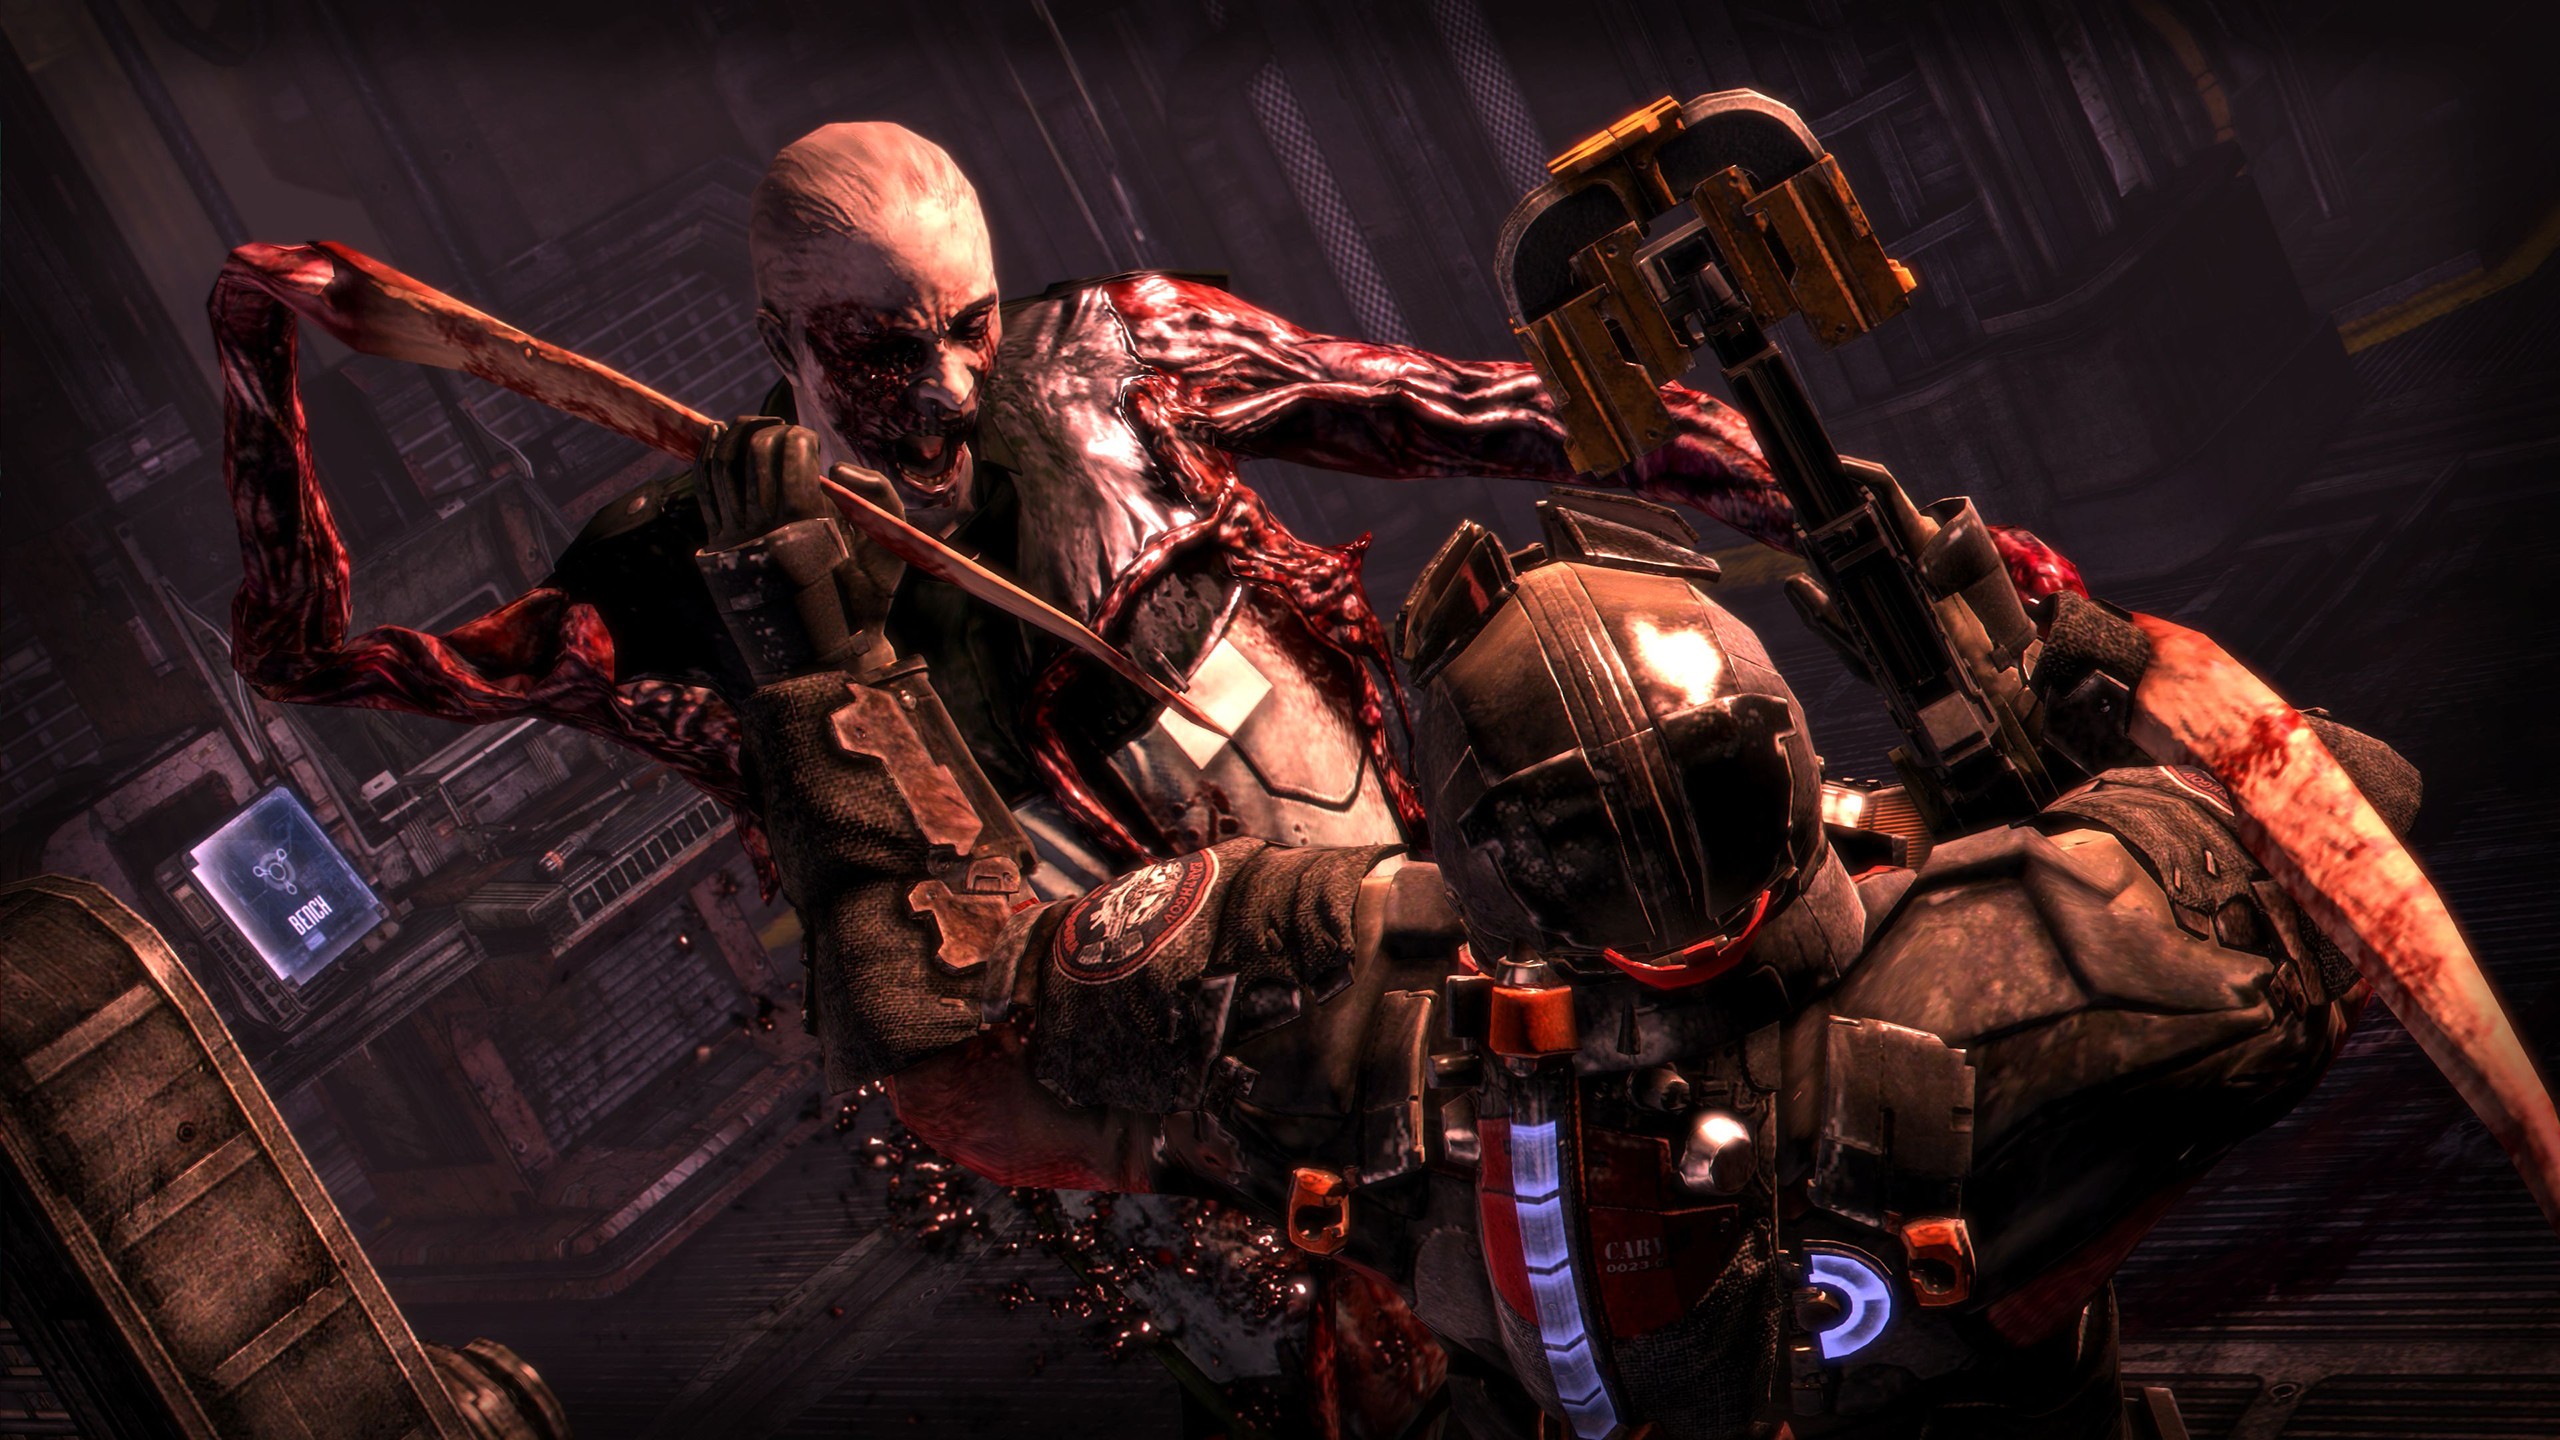 General 2560x1440 Necromorphs Dead Space Dead Space 3 Video Game Horror video games gore horror science fiction